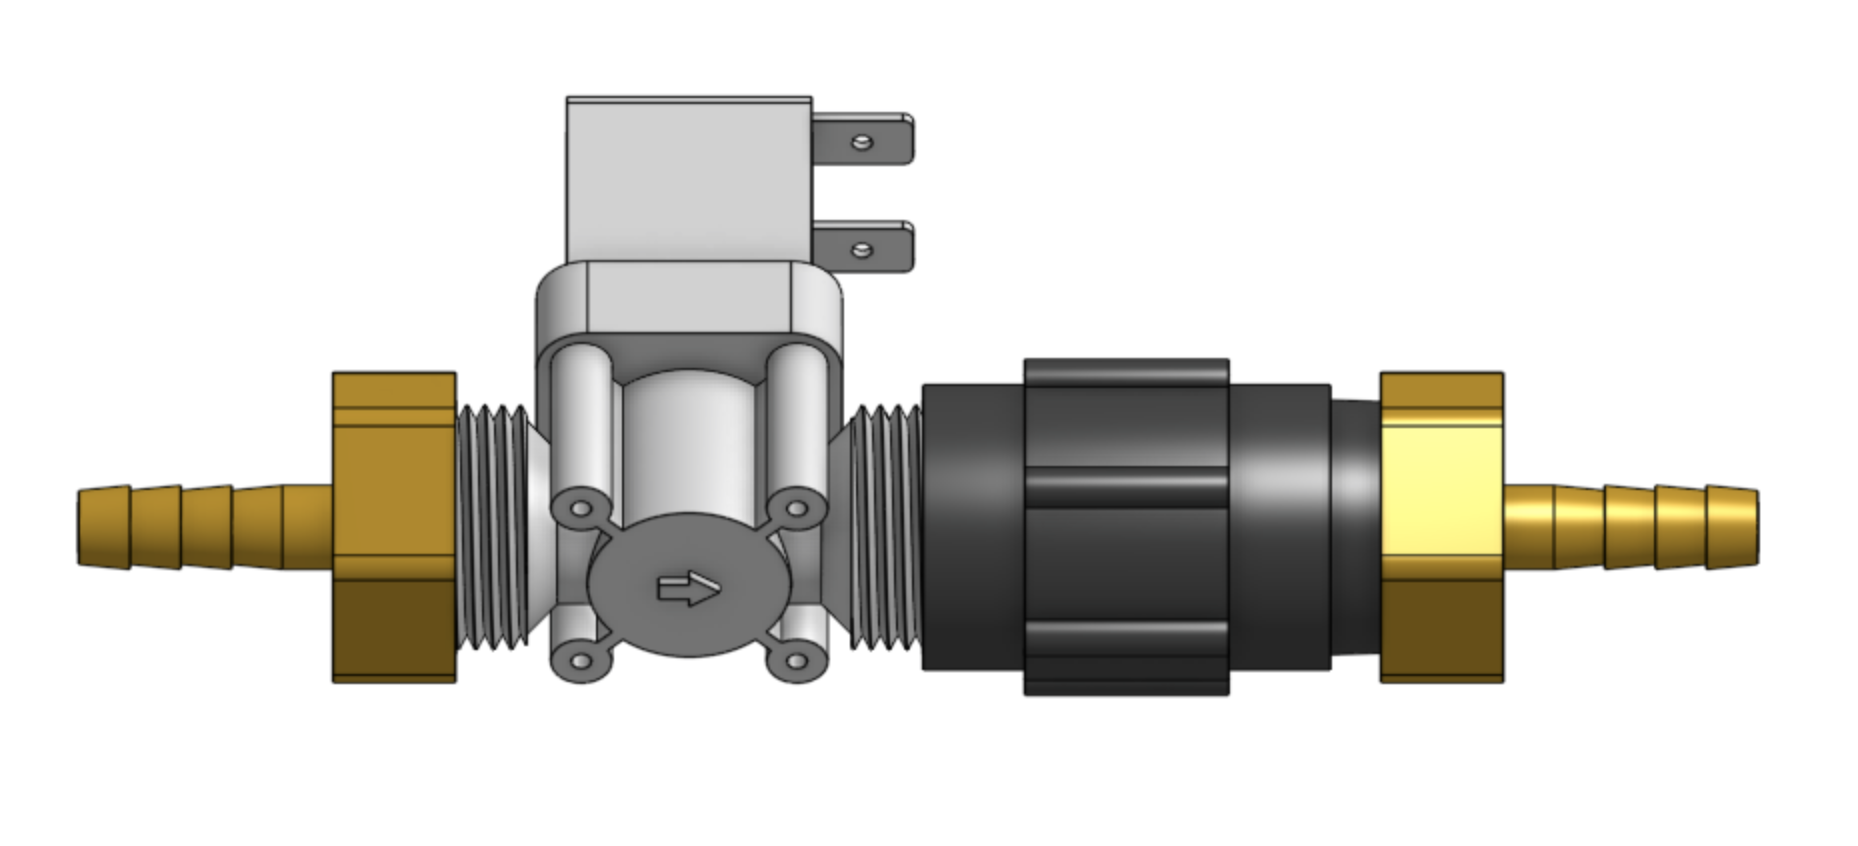 solenoid valve with pressure regulator and barb adapters